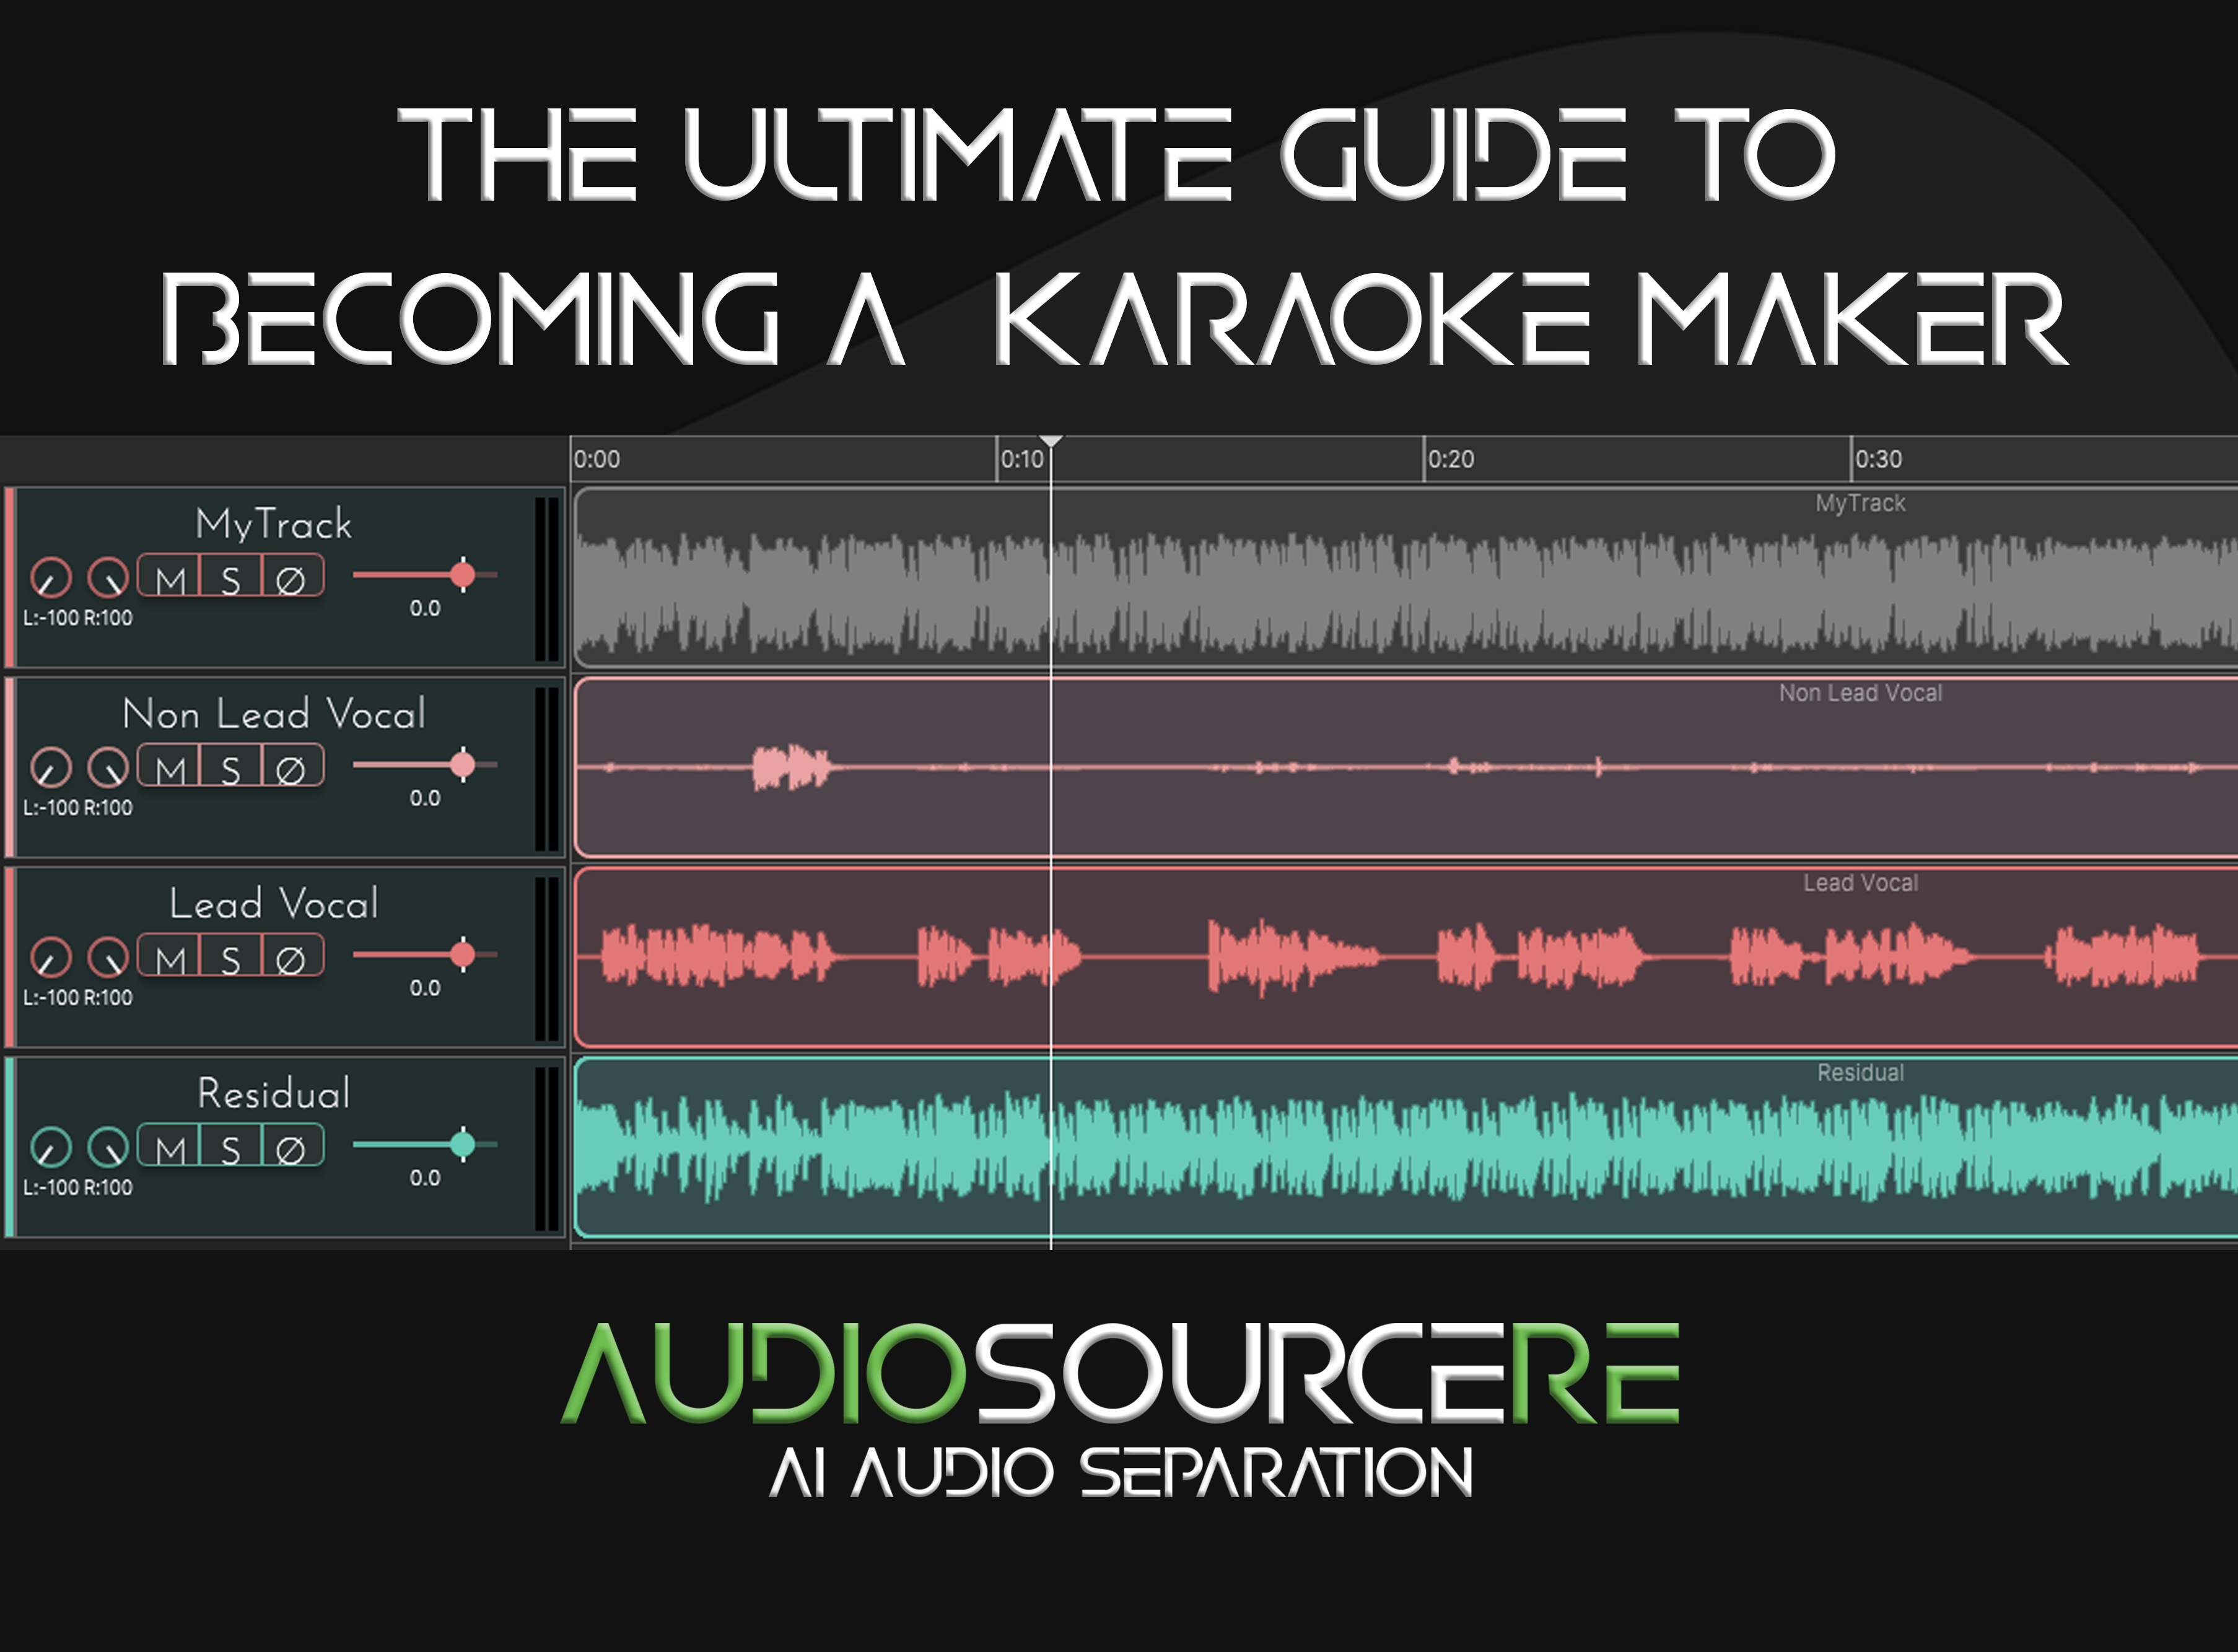 The Ultimate Guide to becoming a karaoke maker.